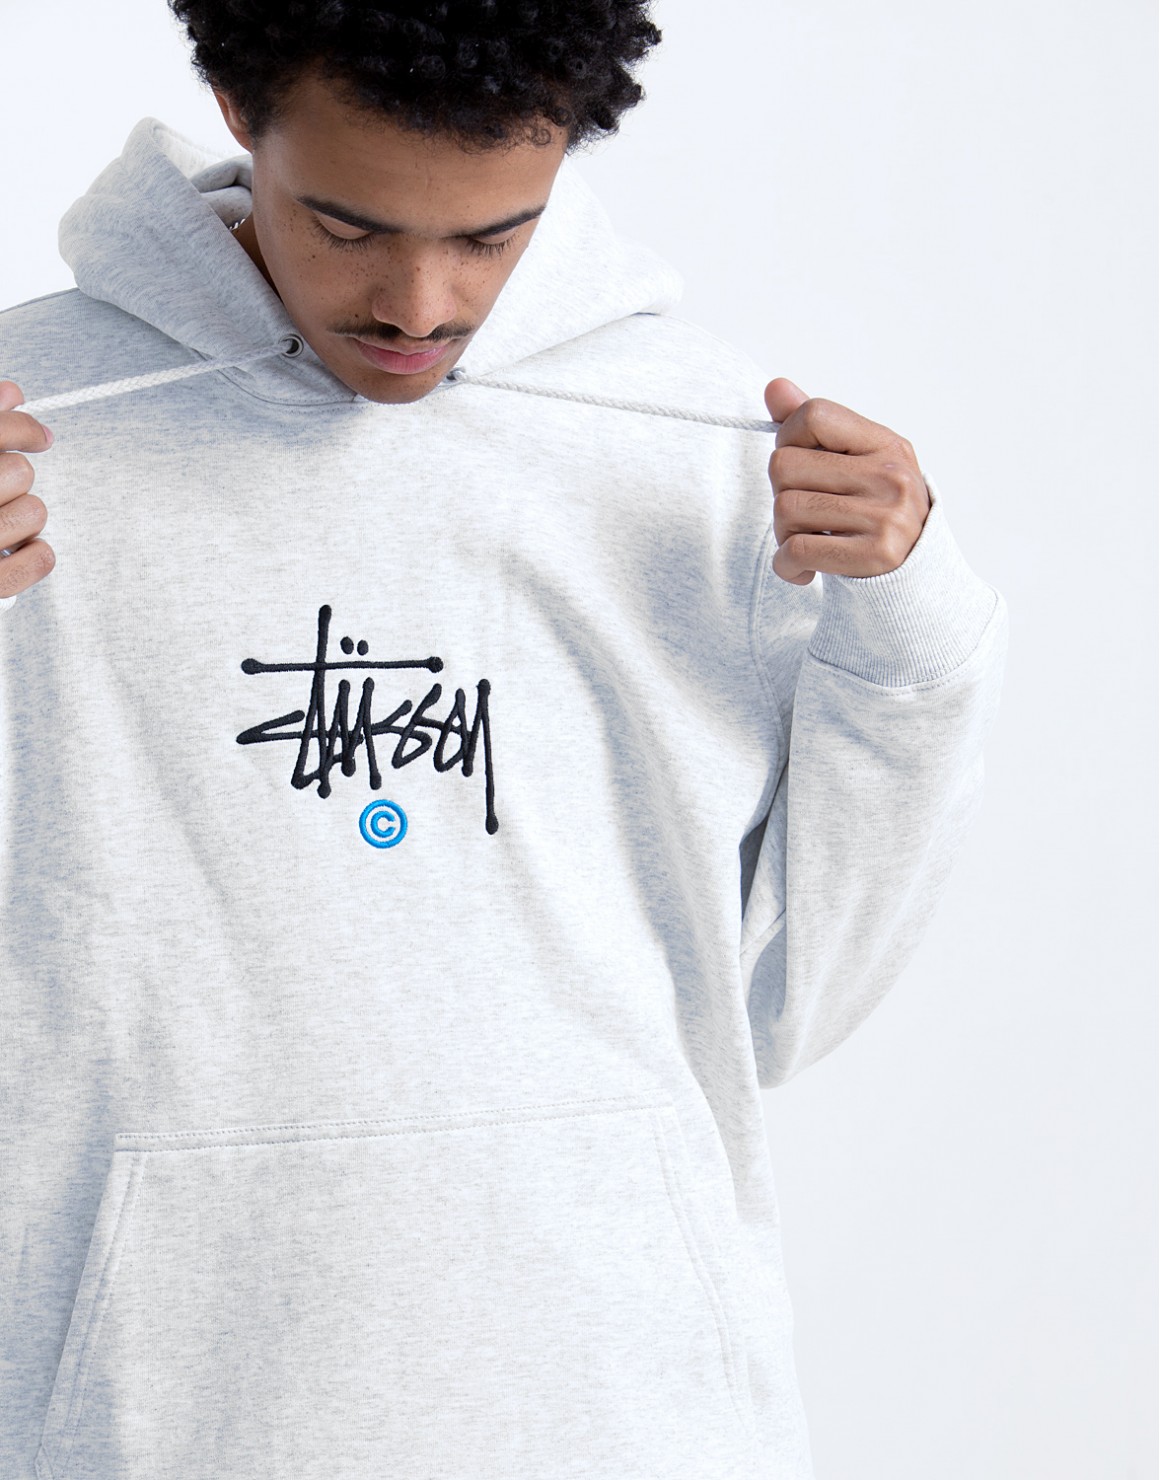 Threads That Inspire: USA’s Melody of Men’s Travis Scott and Stussy Hoodie Fashion